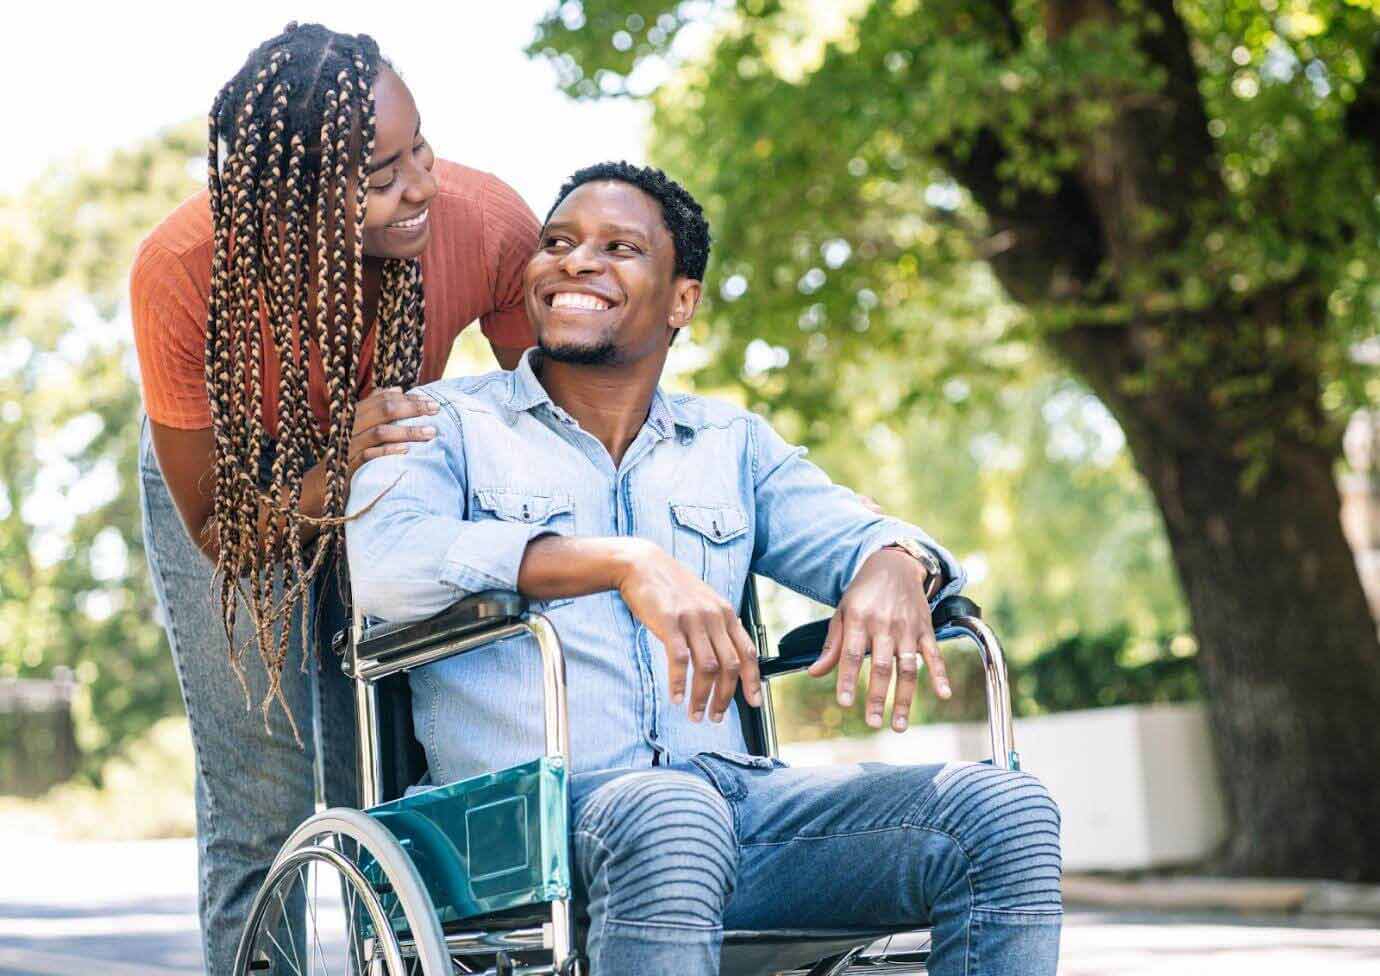 Outside, a woman stands and is leaning over behind a man who is in a wheelchair. They are smiling at each other.